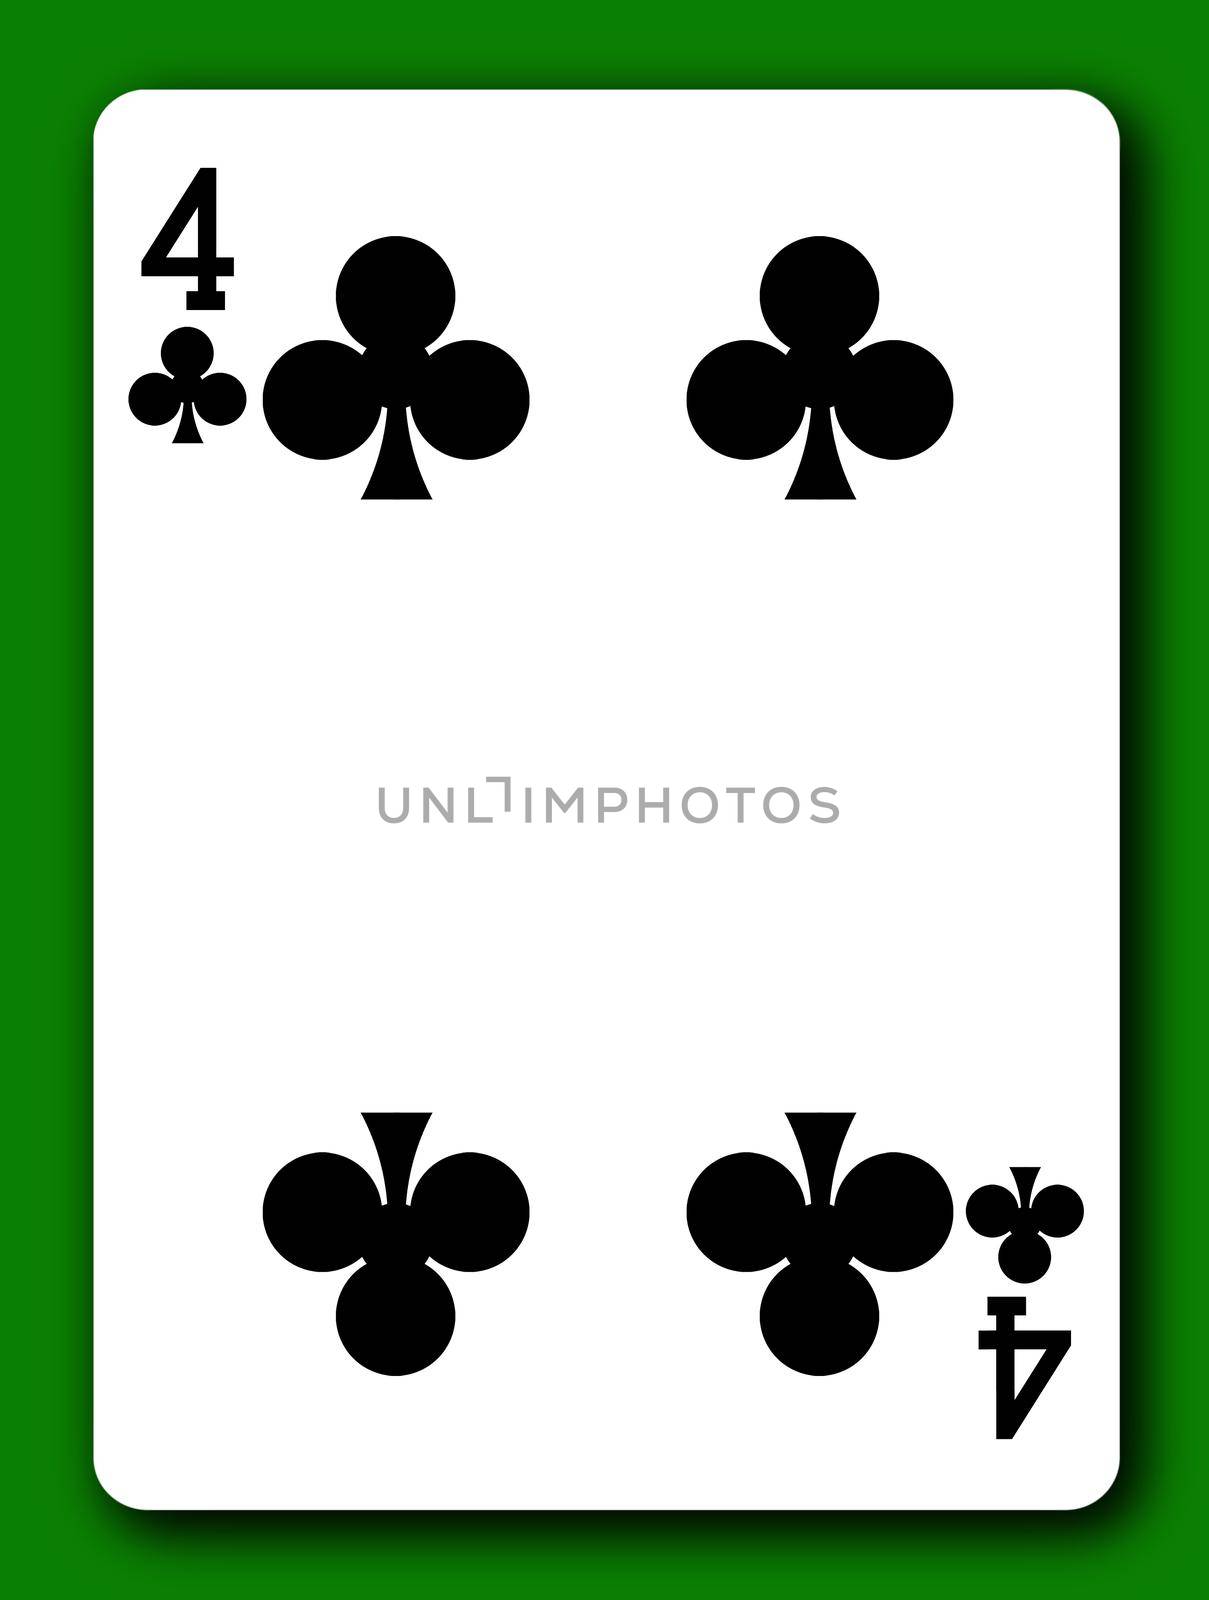 A 4 Four of Clubs playing card with clipping path to remove background and shadow 3d illustration